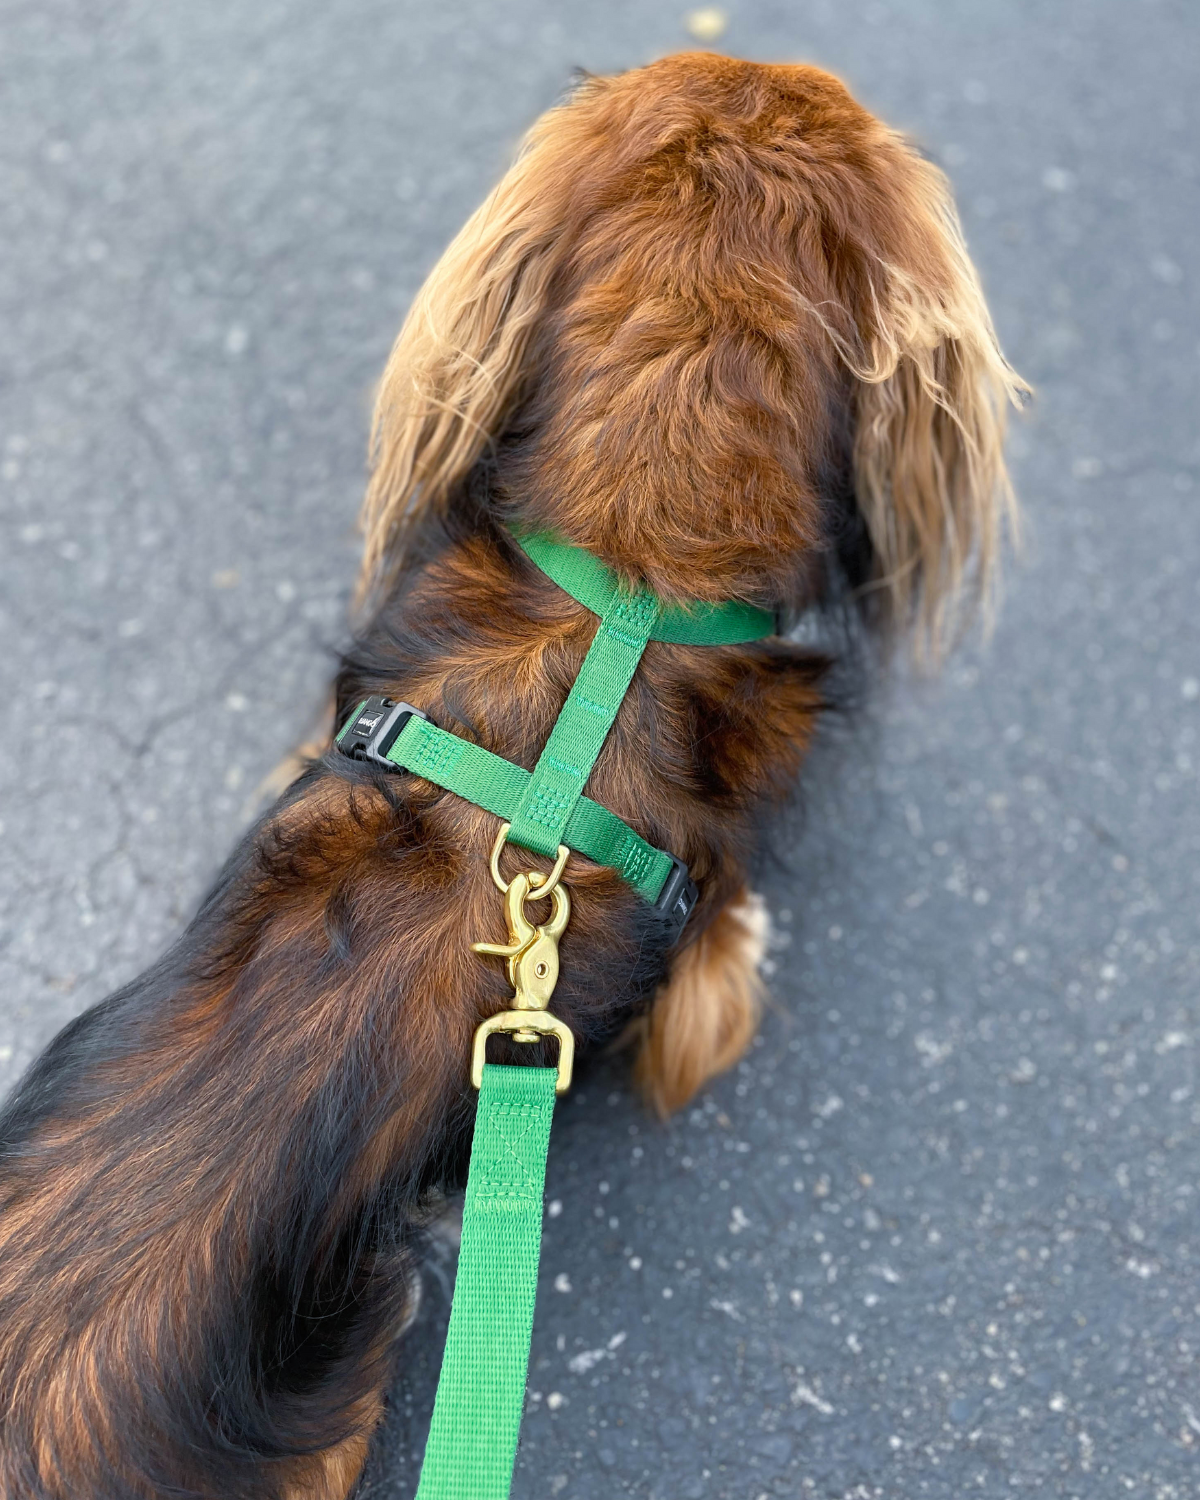 DJANGO's Adjustable Hands-Free Dog Leash features beautiful solid-cast hardware that pairs perfectly with your favorite DJANGO dog harness and collar - djangobrand.com